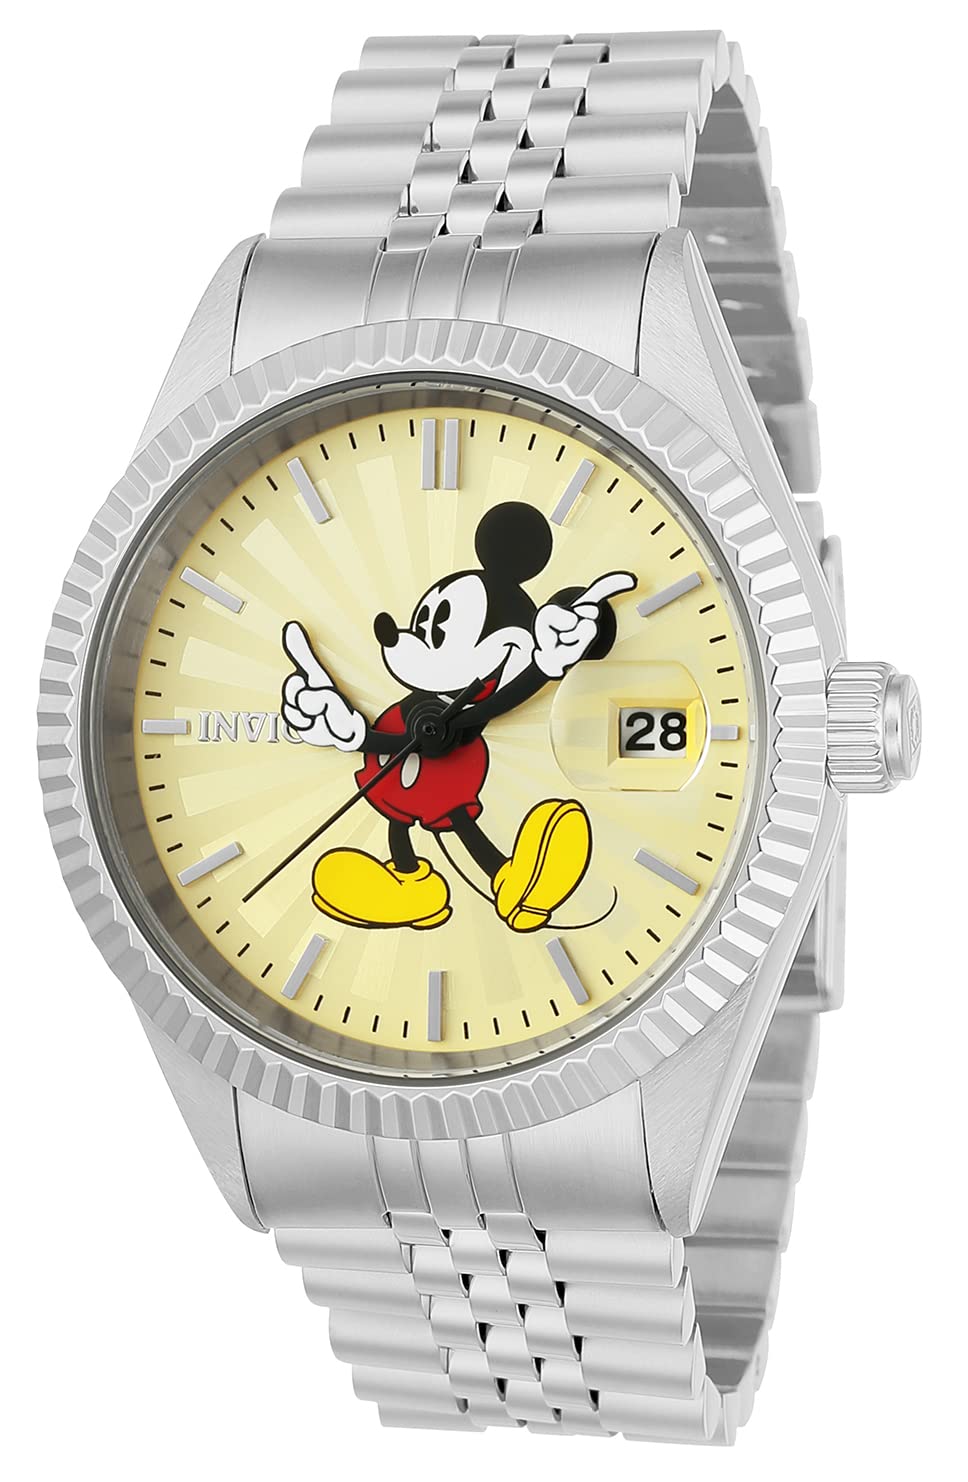 Invicta Mickey Mouse Men's 22769 Disney Limited Edition Analog Display Quartz Silver Watch